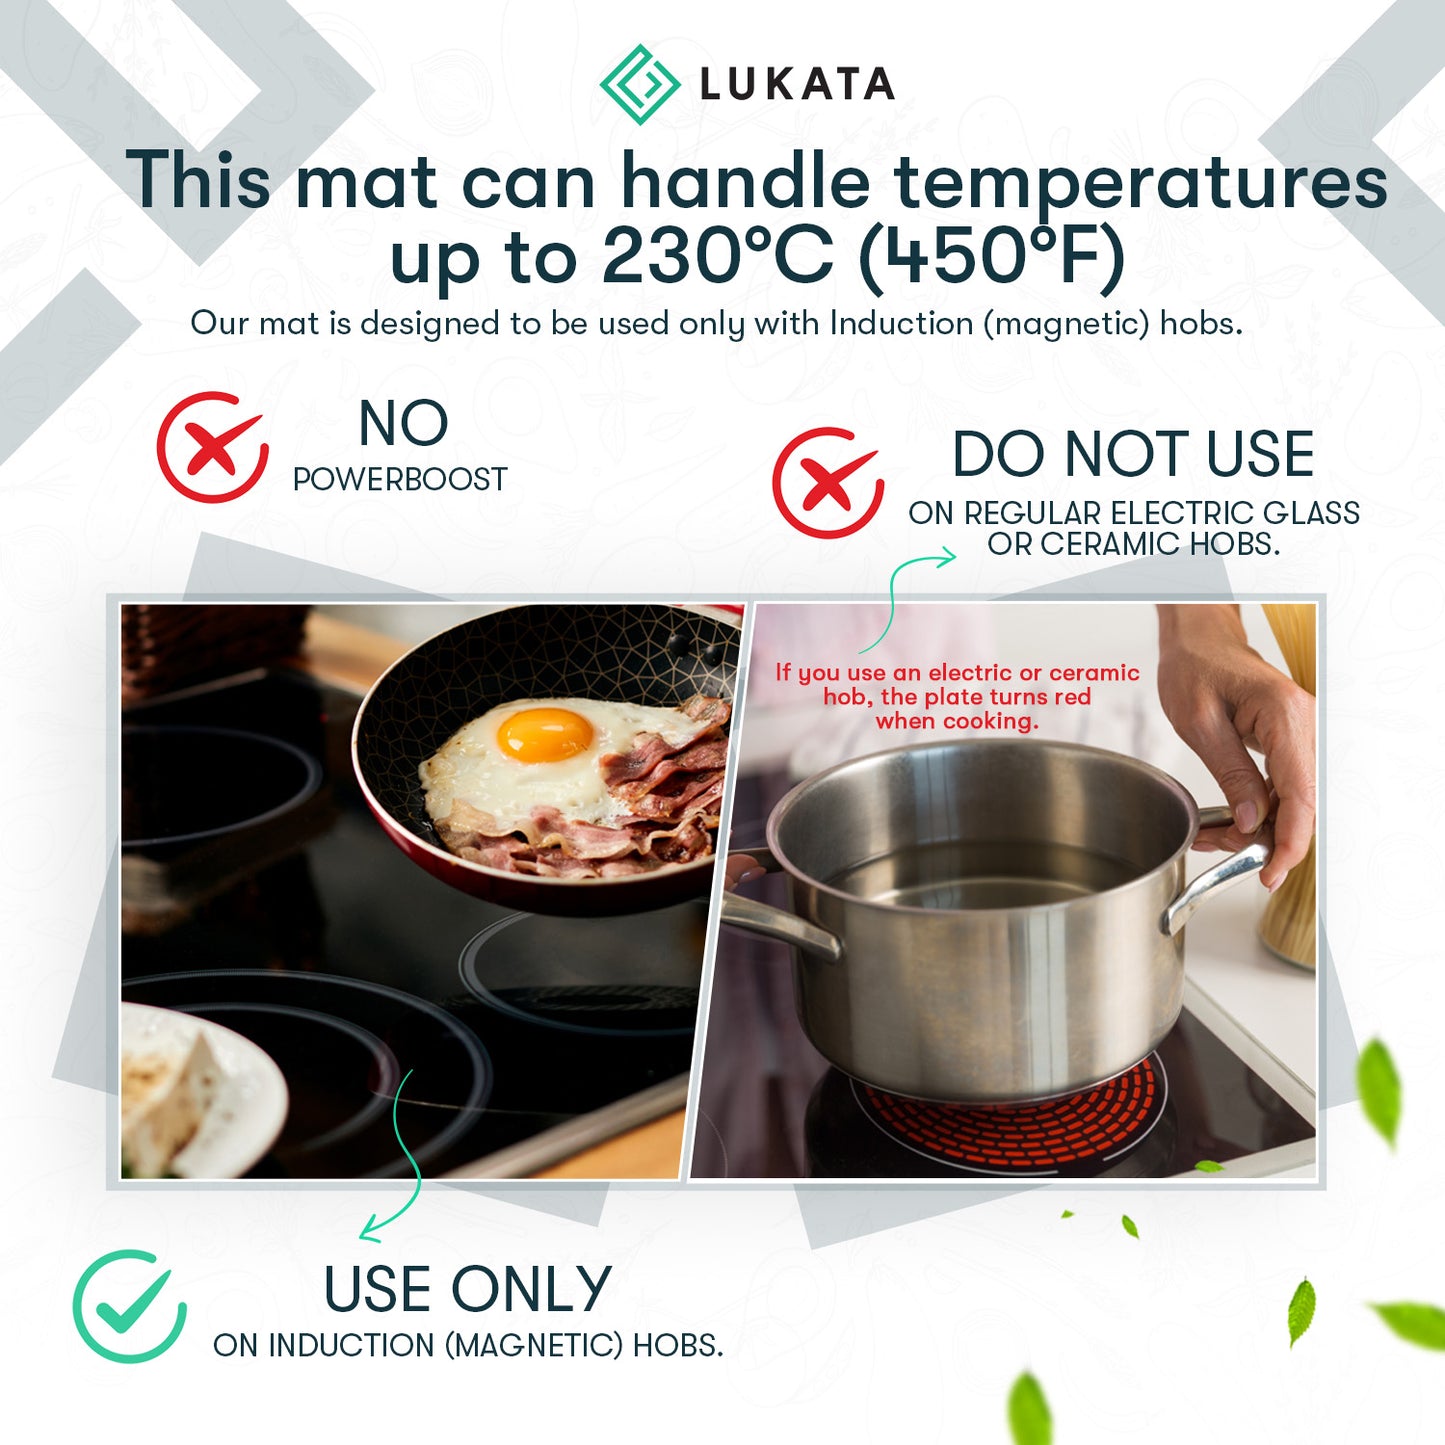 Silicone Induction Hob Protection Mat - Heat-Resistant, Scratch-Proof, 60cm x 55cm x 2mm